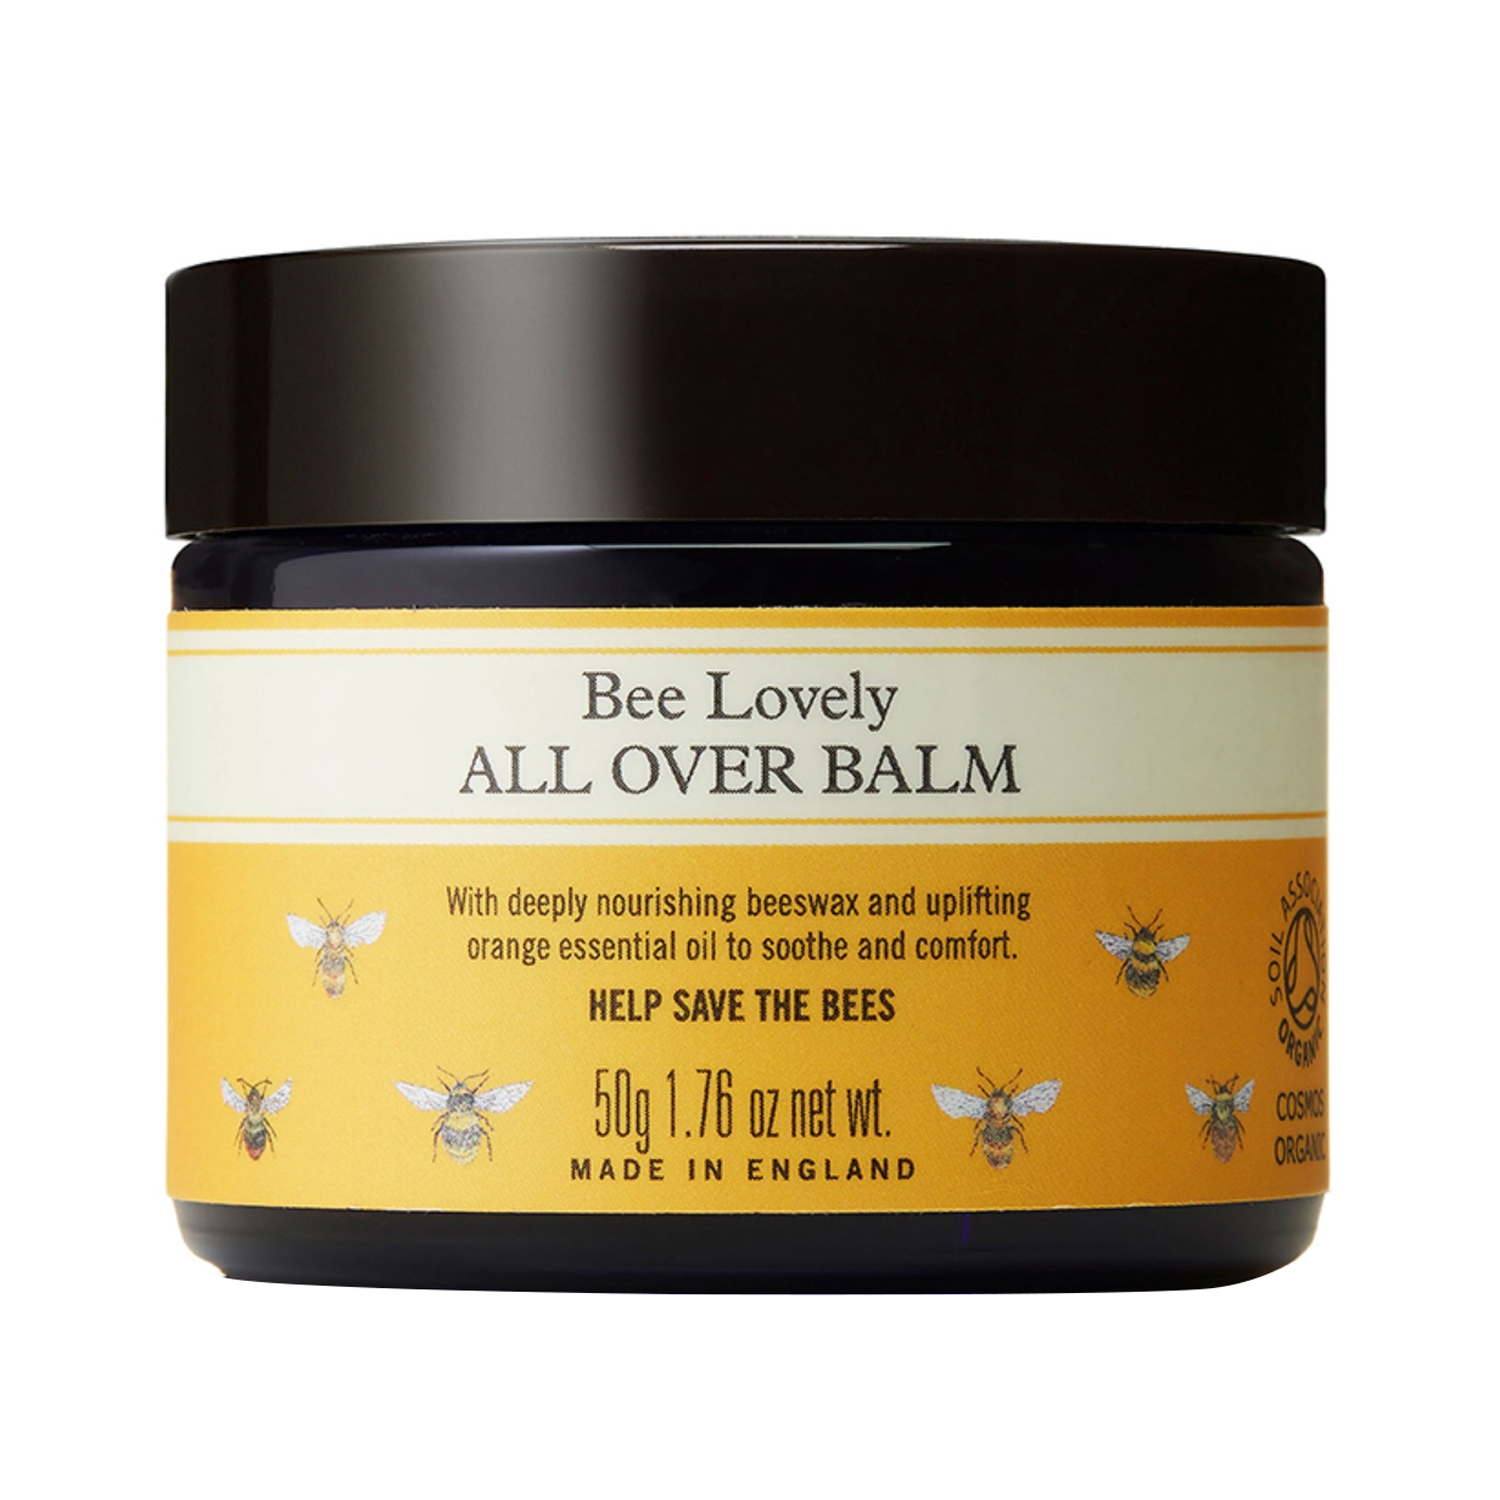 Neal's Yard Remedies | Neal's Yard Remedies Bee Lovely All Over Balm (50g)